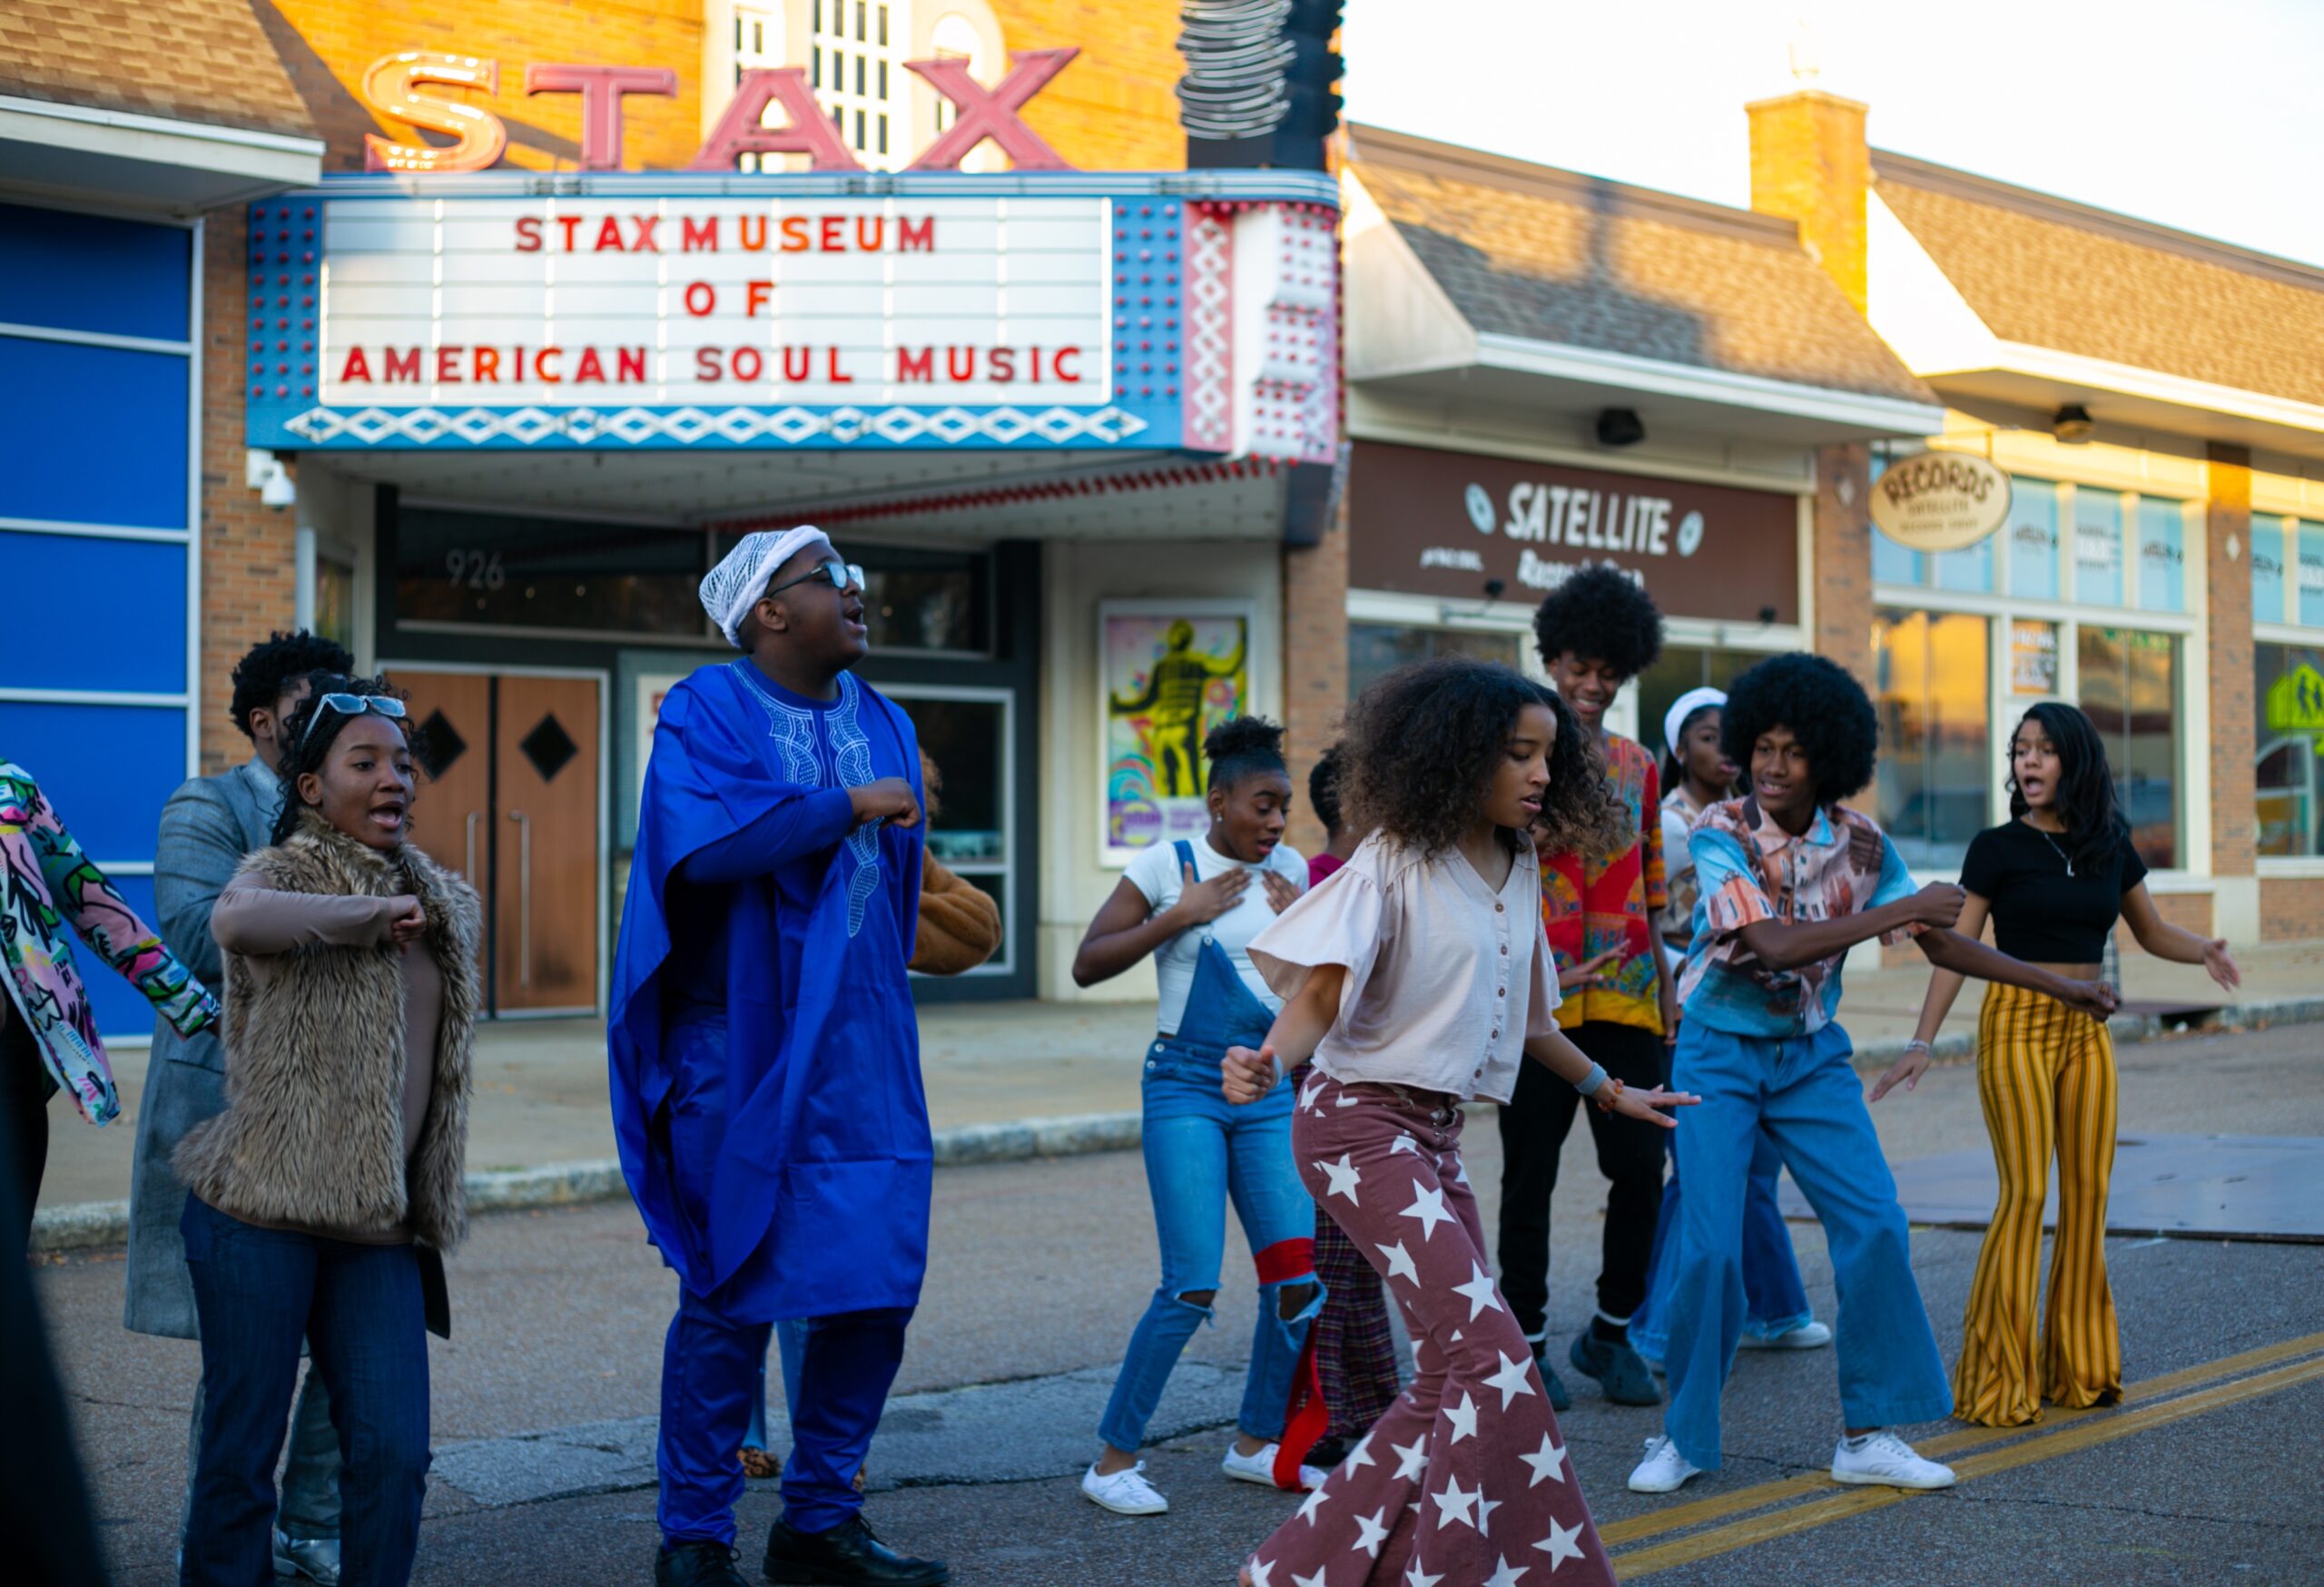 A group of people dancing in front of a theater, showcasing the Soul of America.